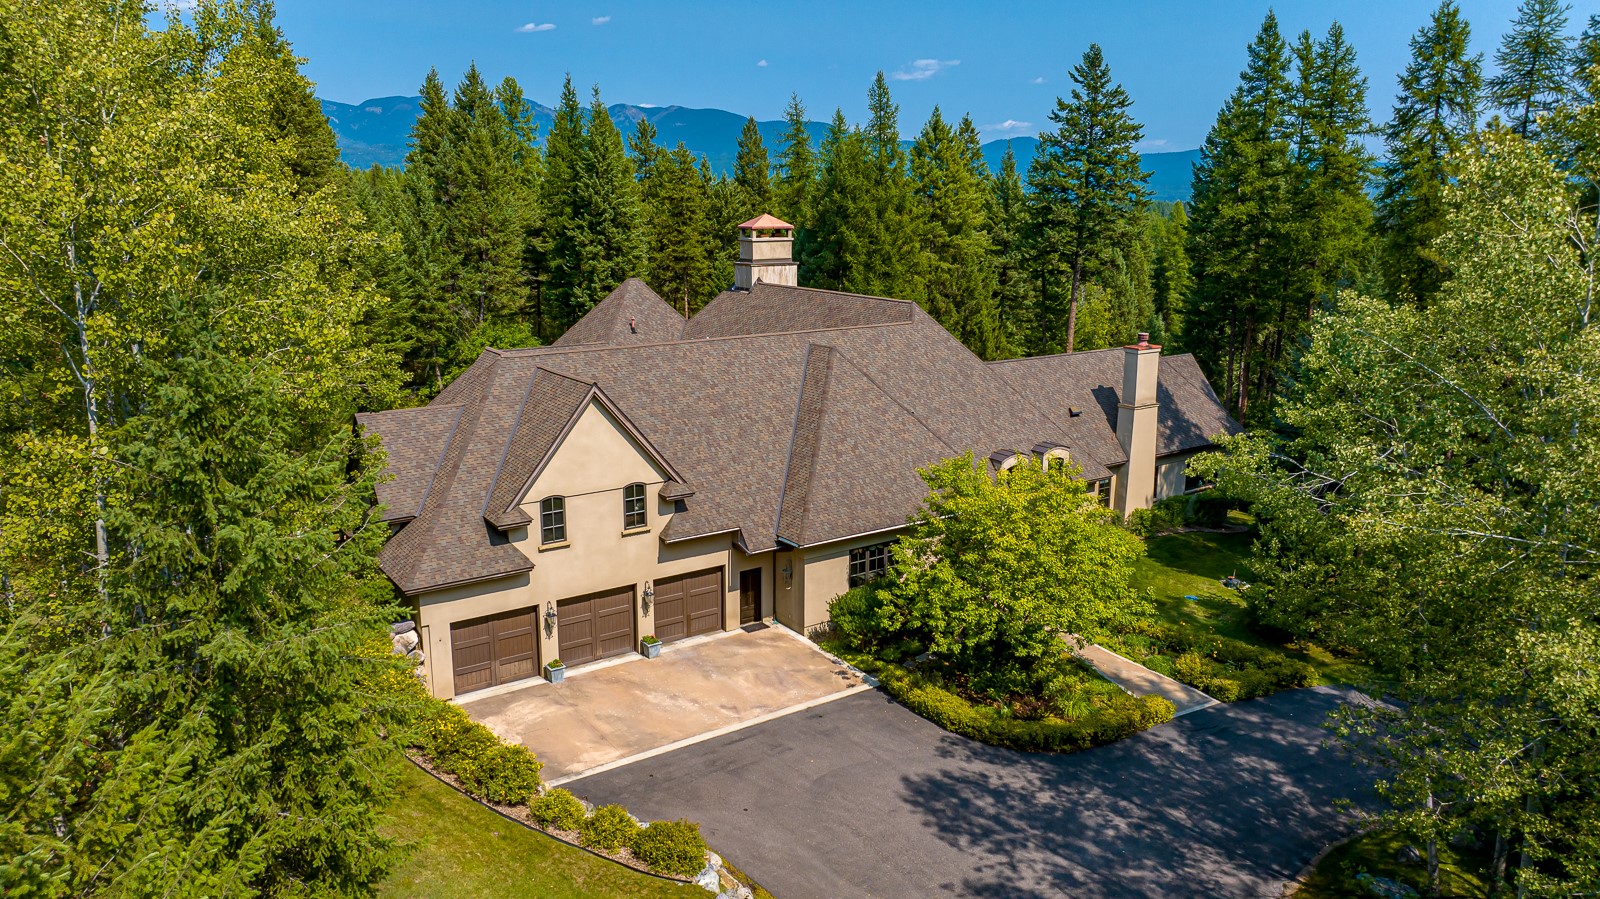 Whitefish Hills Elegance! European charm encounters Montana rustic sure to please even the most discerning of buyers. Tucked away on nearly 10 private acres in the coveted and gated Whitefish Hills community, off a winding drive lined with mature trees awaits this sprawling 6,839 sf, 4-bedroom, 5-bathroom estate exuding French Country charm. Grand features mingle with cozy warmth and the oversized windows showcase stunning views of Whitefish Mountain and bathe the home in sunlight during the day. Soaring ceilings with butternut beams, red oak flooring, and alder doors throughout lend to the properties warm & inviting atmosphere. Designed with entertaining in mind, this spectacular home features a welcoming family room, designer kitchen, complete with butler’s pantry & apron-front farmhouse sink, an outside sitting area made for sunset enjoyment, lush landscaping and so much more! Call Ken Stein 406-250-0599, Matt Buckmaster 406-261-8350, or your real estate professional for more info. Whitefish Hills amenities include hiking and horseback riding trials, and Blanchard Lake access for fishing, canoeing and paddle boarding all within a short drive from downtown Whitefish, Whitefish Lake and Whitefish Mountain Resort. Items to be noted: new pump on hot water tank, A/C has been serviced, new dishwasher and microwave, landscaping has been redone on hedges, new septic pump, driveway has been sealed, new control panel and cice maker in kitchen, bar refrigerator newer with ice, warming oven below double Viking ovens.